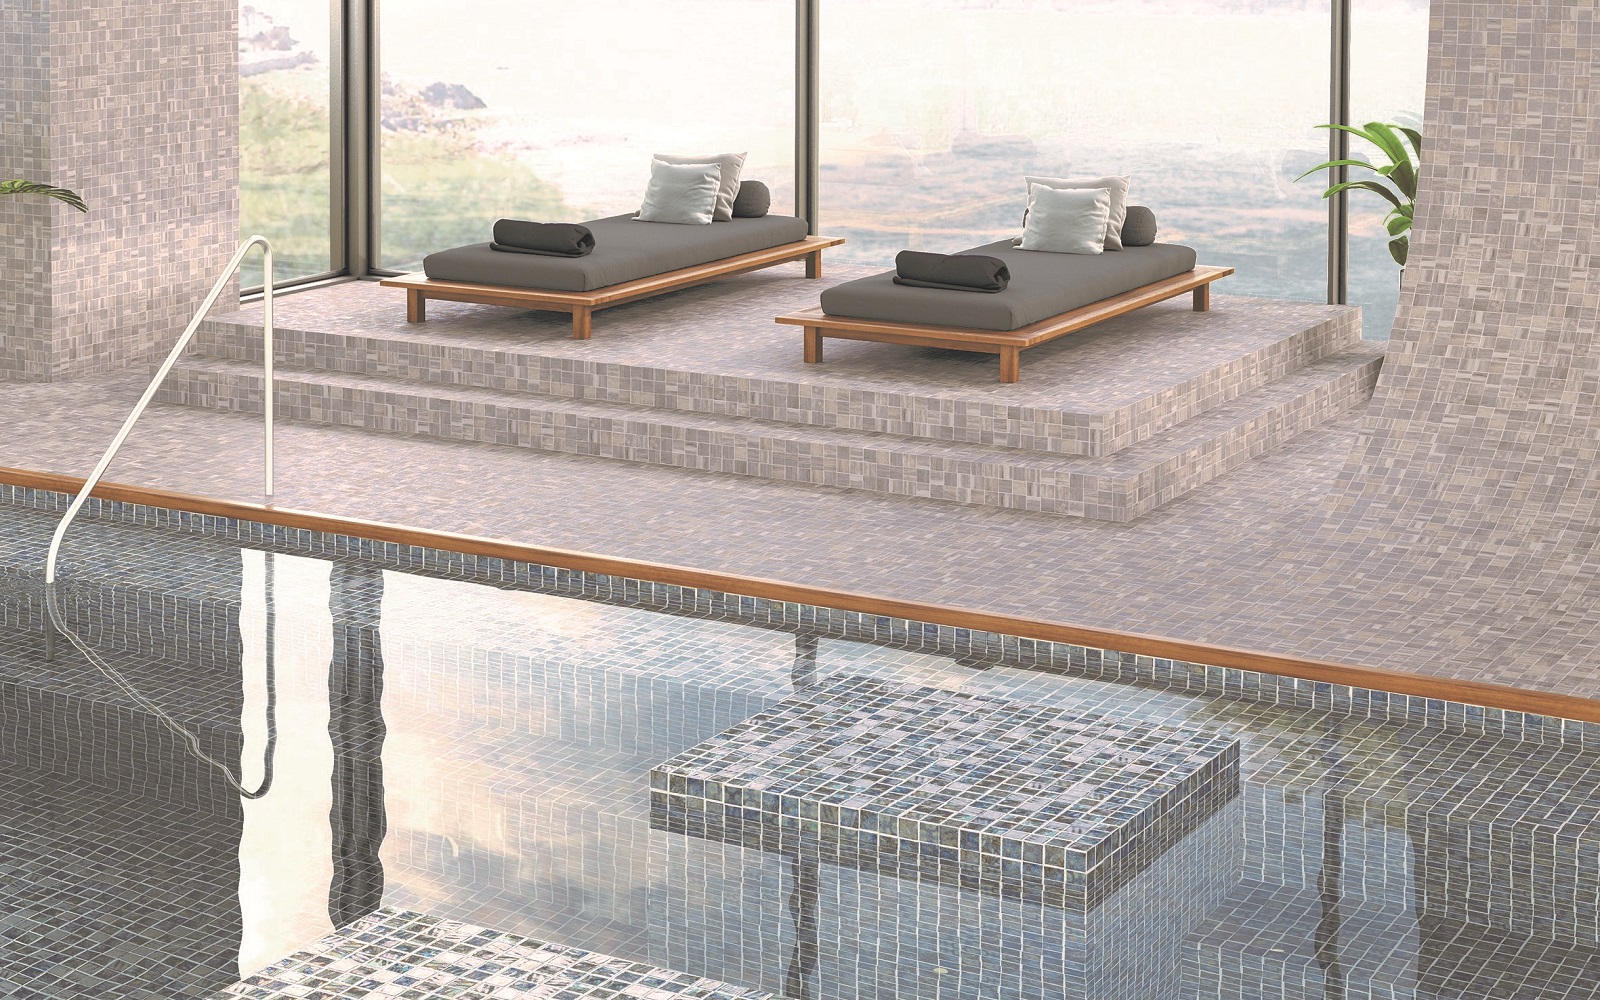 spa and indoor swimming pool tiles in grey mosaic tiles using the Aquatechnica system